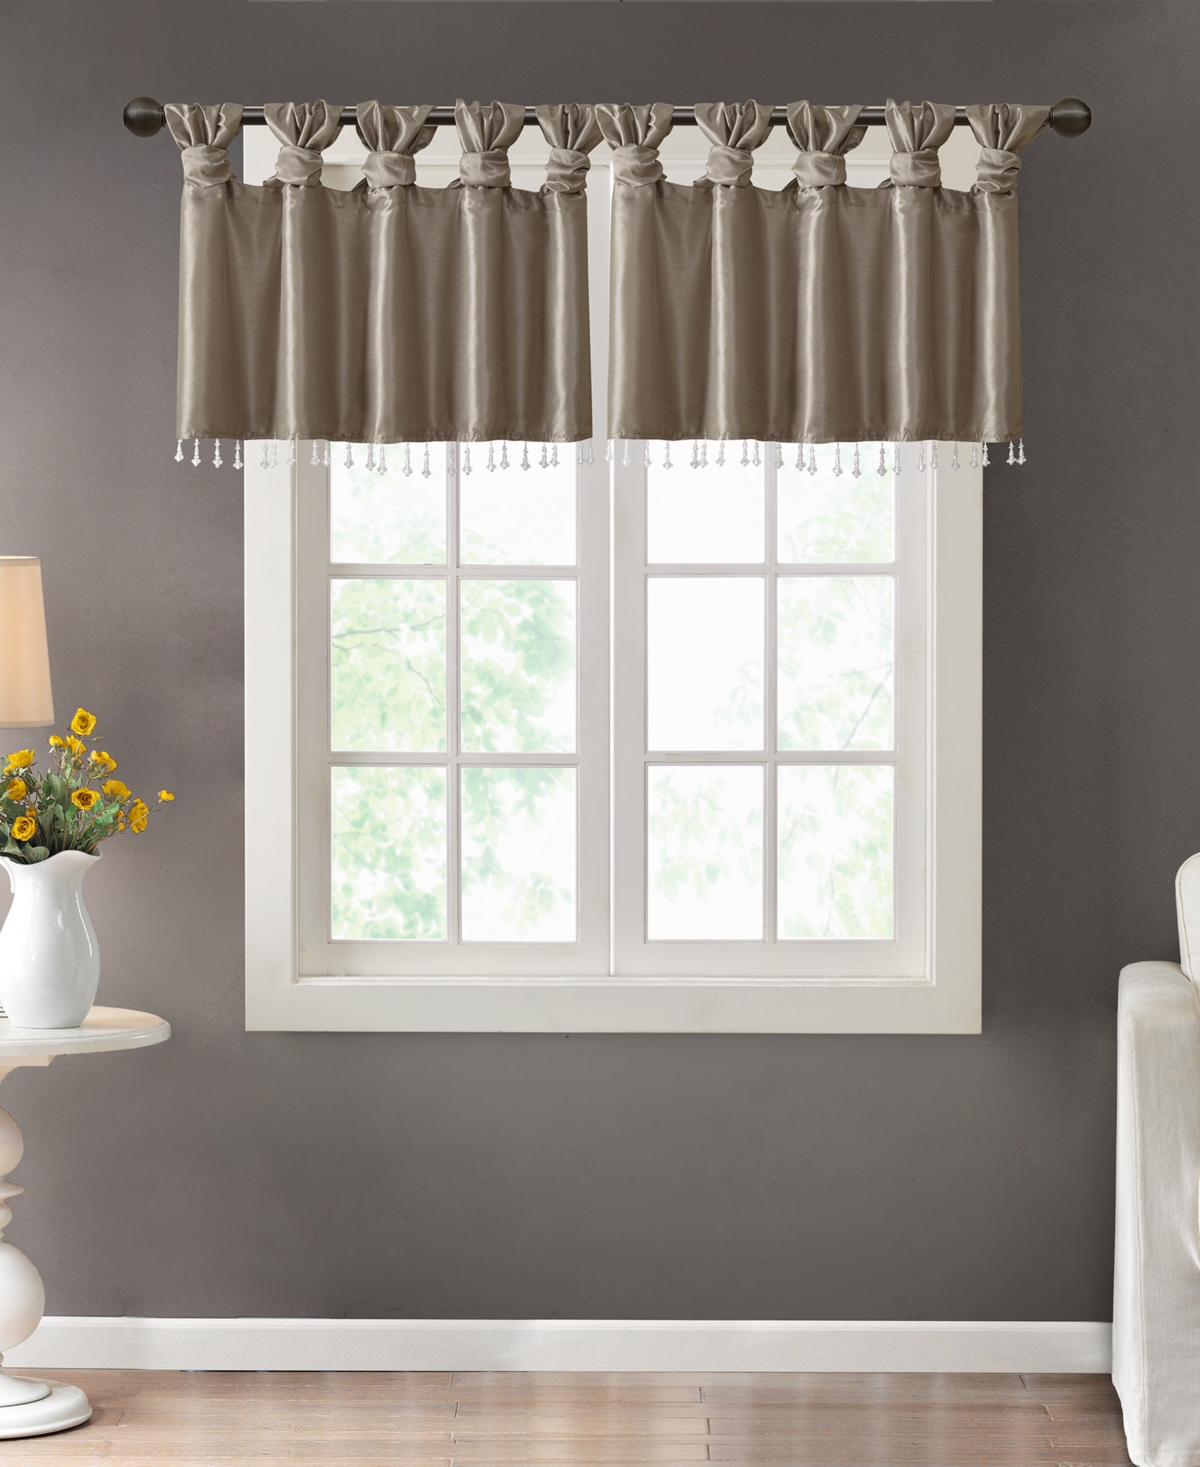 Emilia Lightweight Faux Silk Valance With Beads - Charcoal